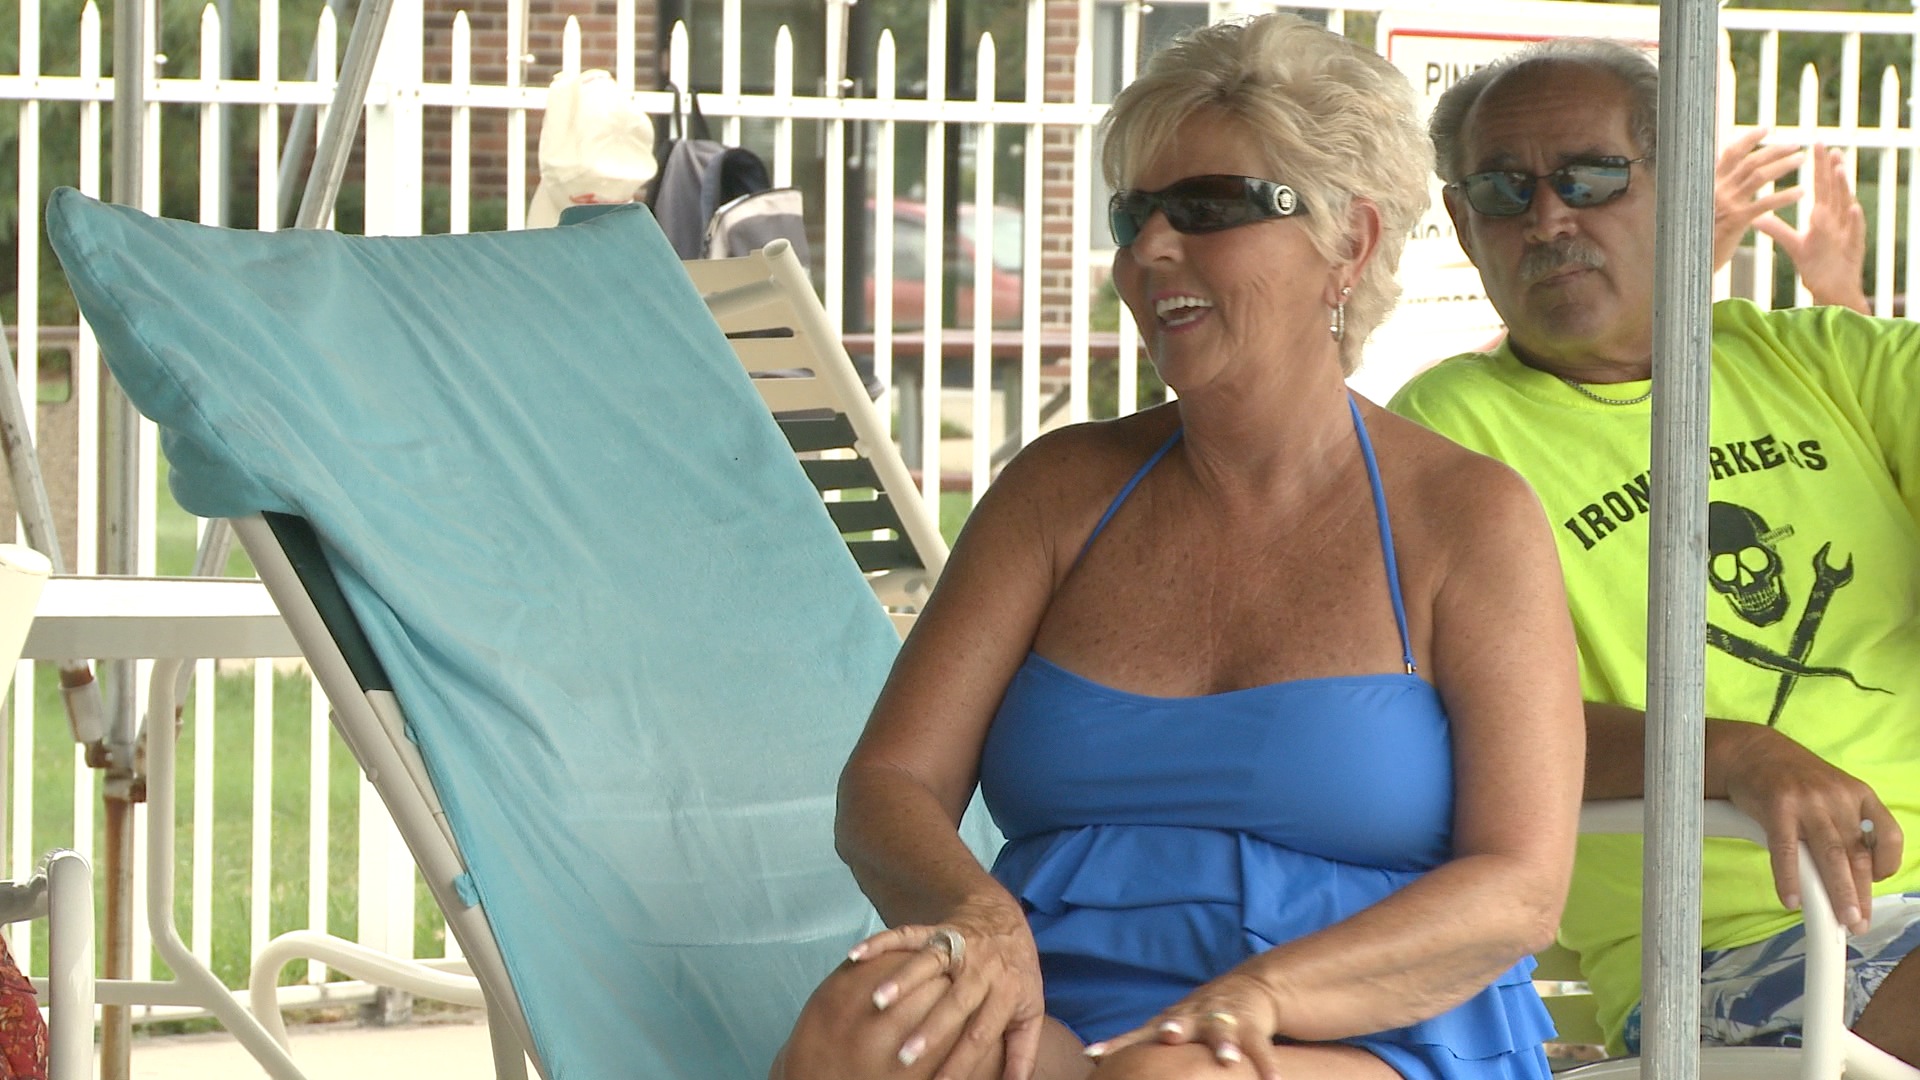 Pine Ridge South Resident Having a Good Time at the Community Pool